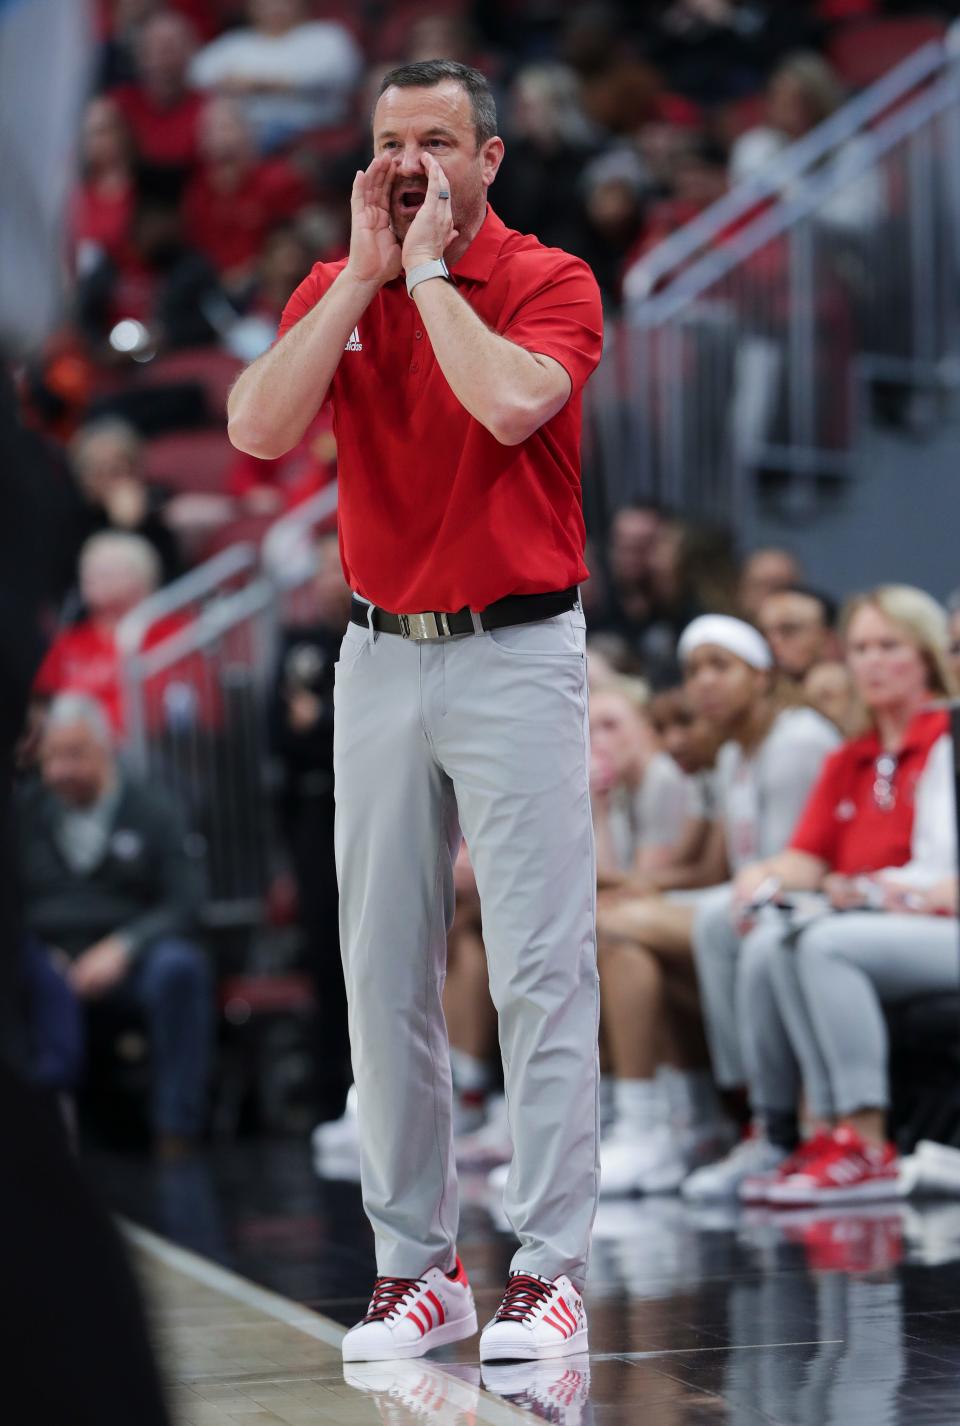 U of L head coach Jeff Walz instructed his team against NC State during their game at the Yum Center in Louisville, Ky. on Jan. 22, 2023.  